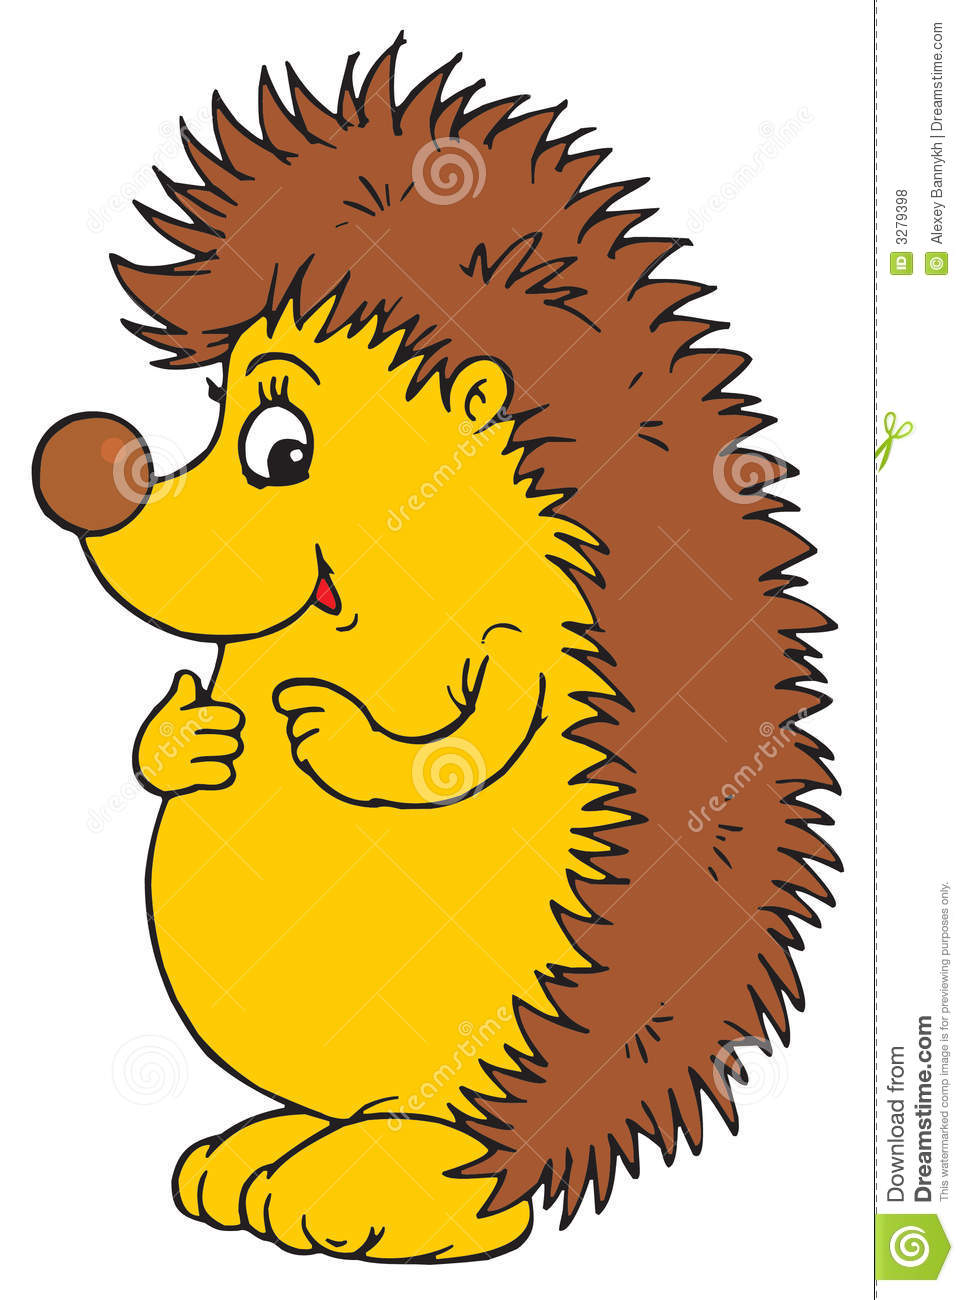 Silly Hedgehog Character Royalty Free Stock Photos   Image  3279398